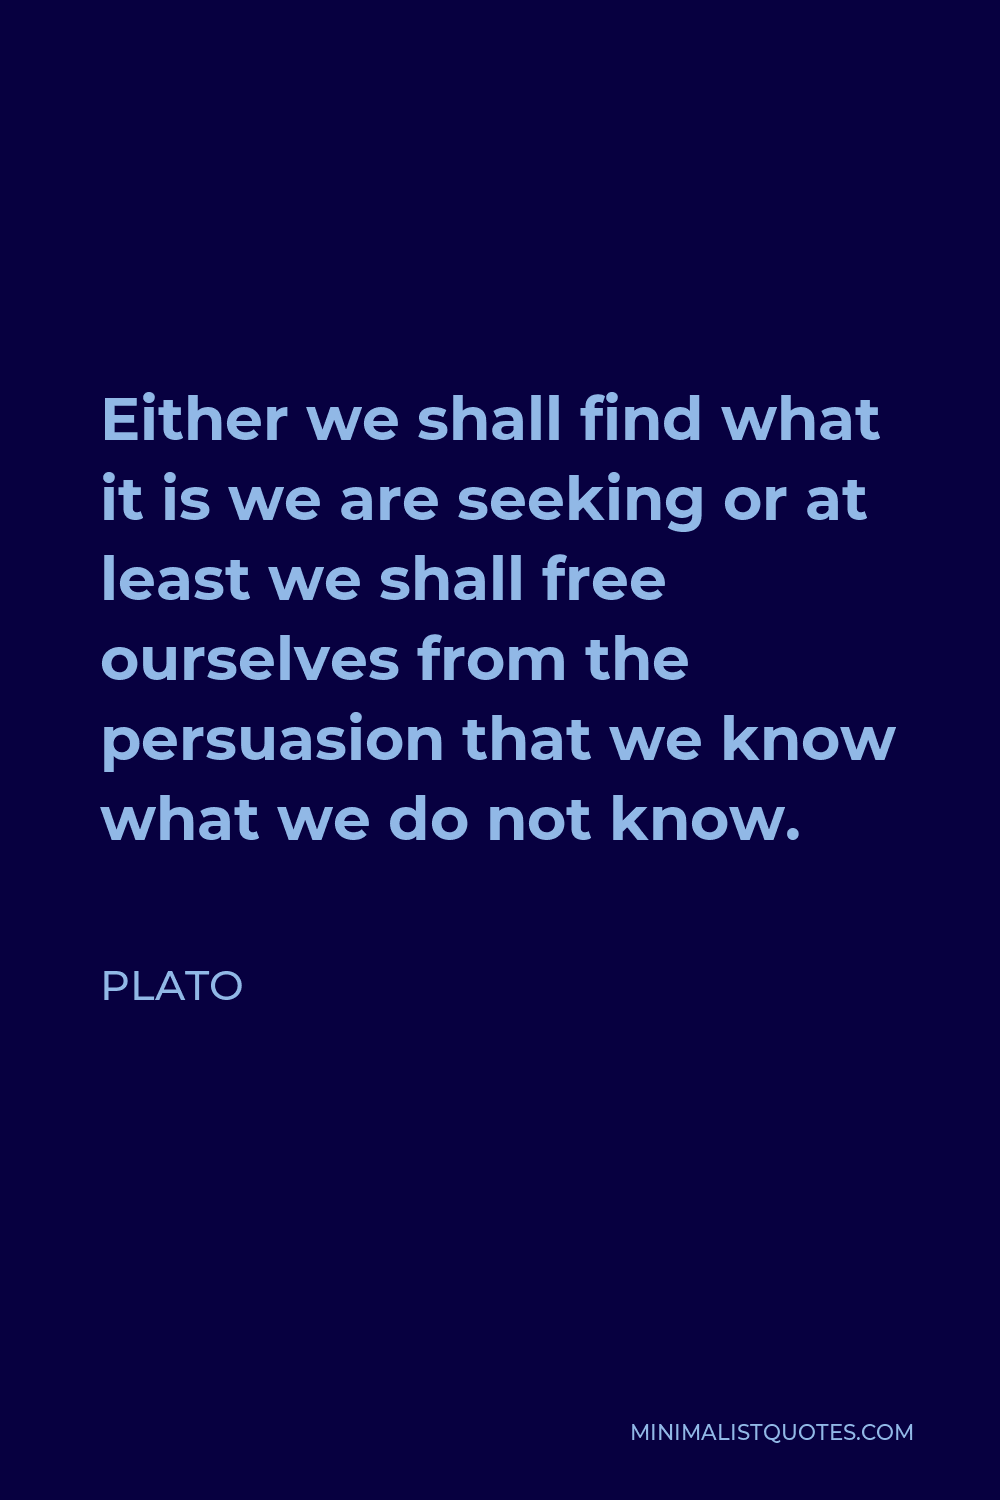 Plato Quote - Either we shall find what it is we are seeking or at least we shall free ourselves from the persuasion that we know what we do not know.